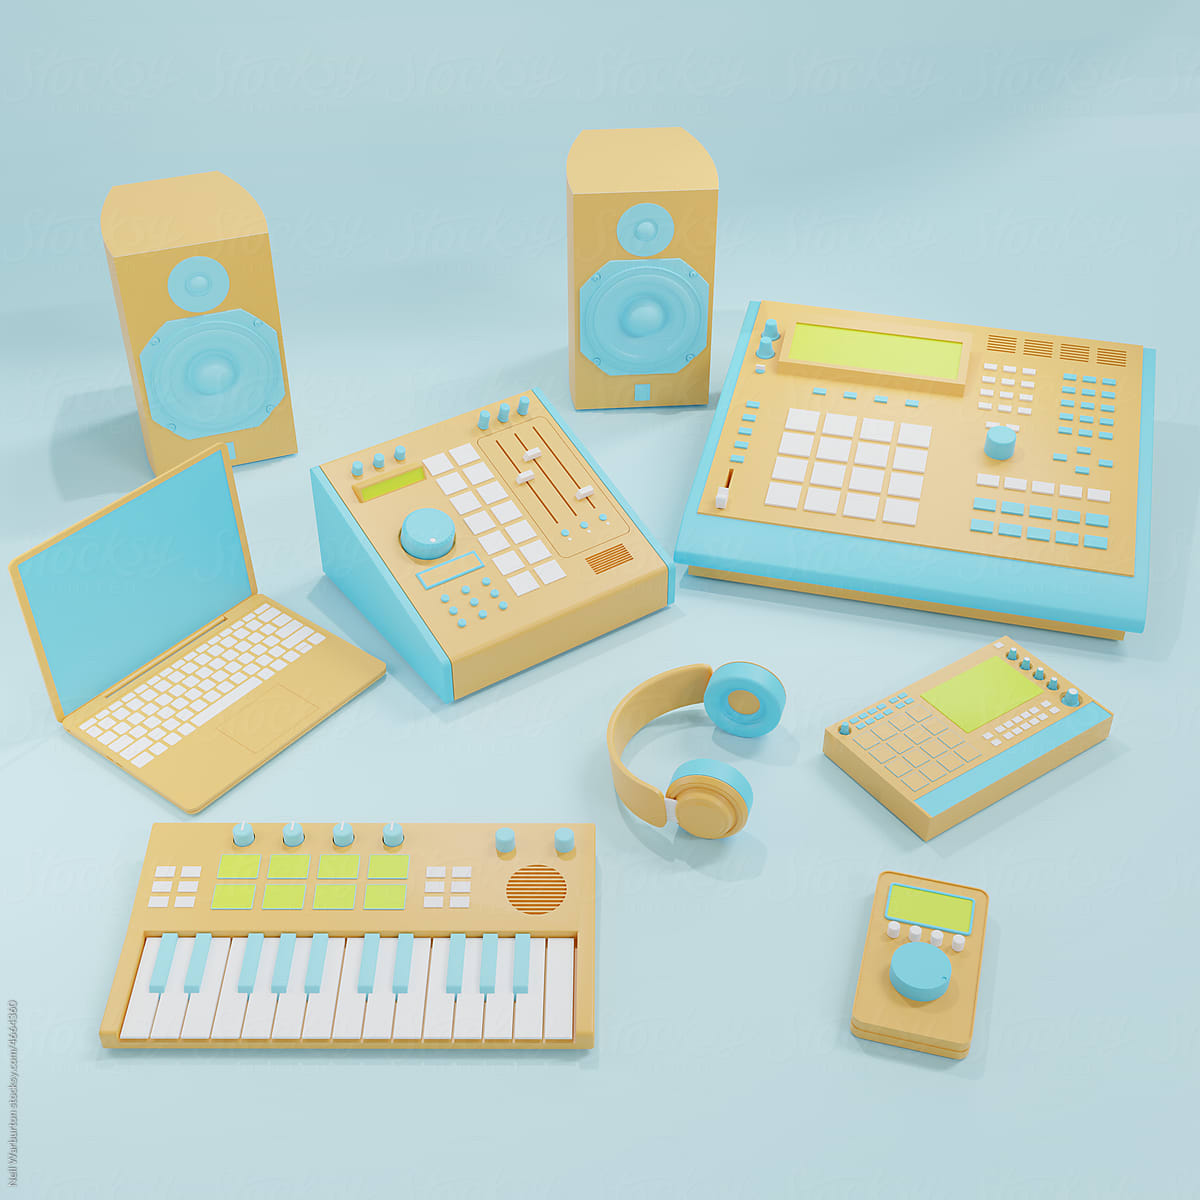 A selection of digital music equipment